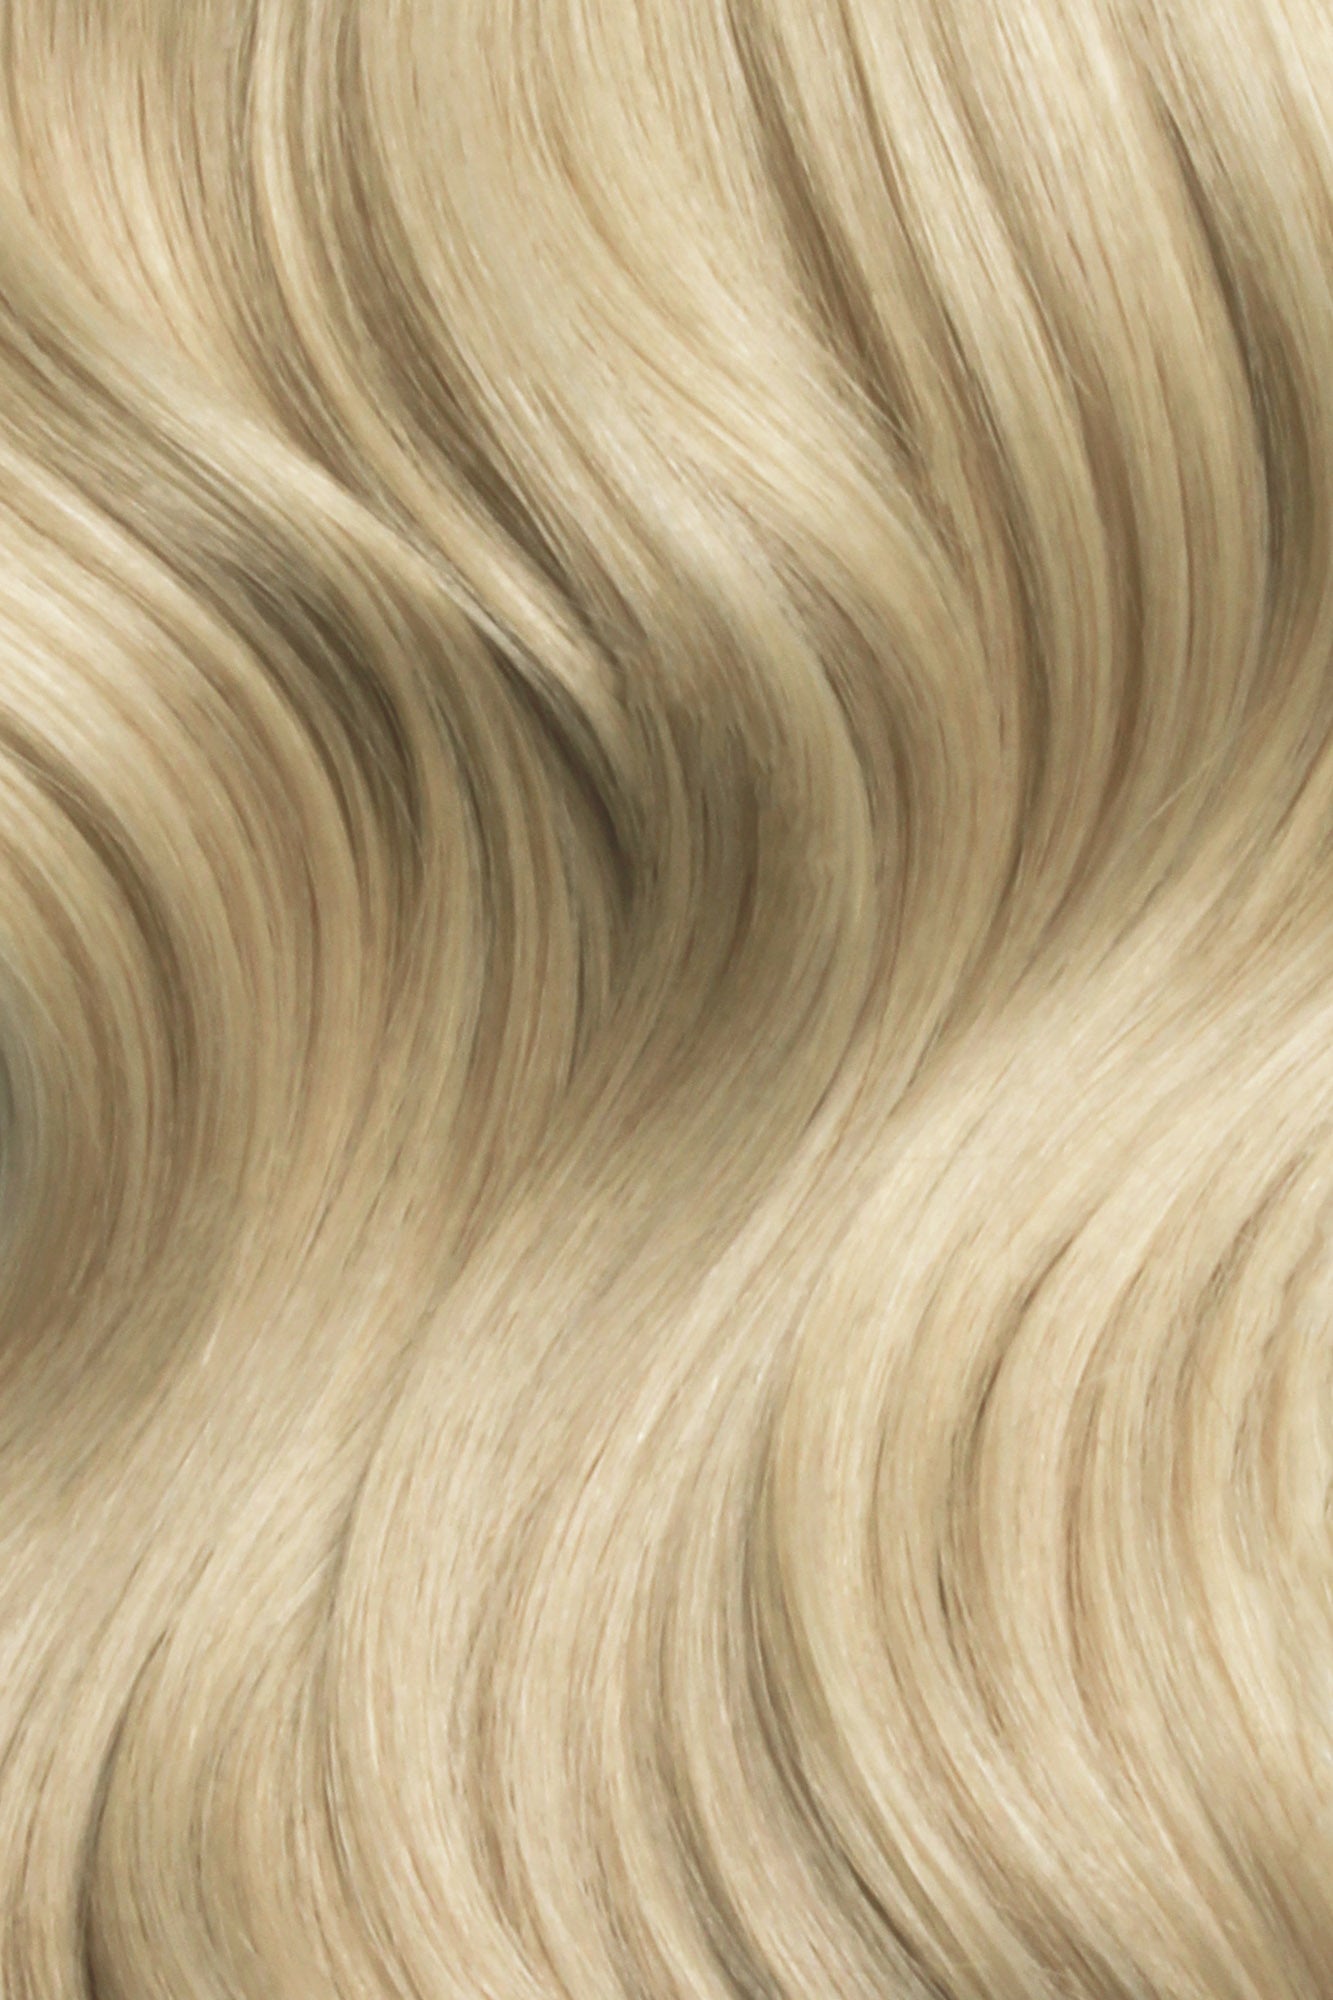 Nano Bonds 24 Inches - SWAY Hair Extensions Silver-Ash-Blonde-60A-Silver Ultra-fine, invisible bonds for a flawless, natural look. 100% Remy Human hair, lightweight and versatile. Reusable and perfect for individual or salon use.